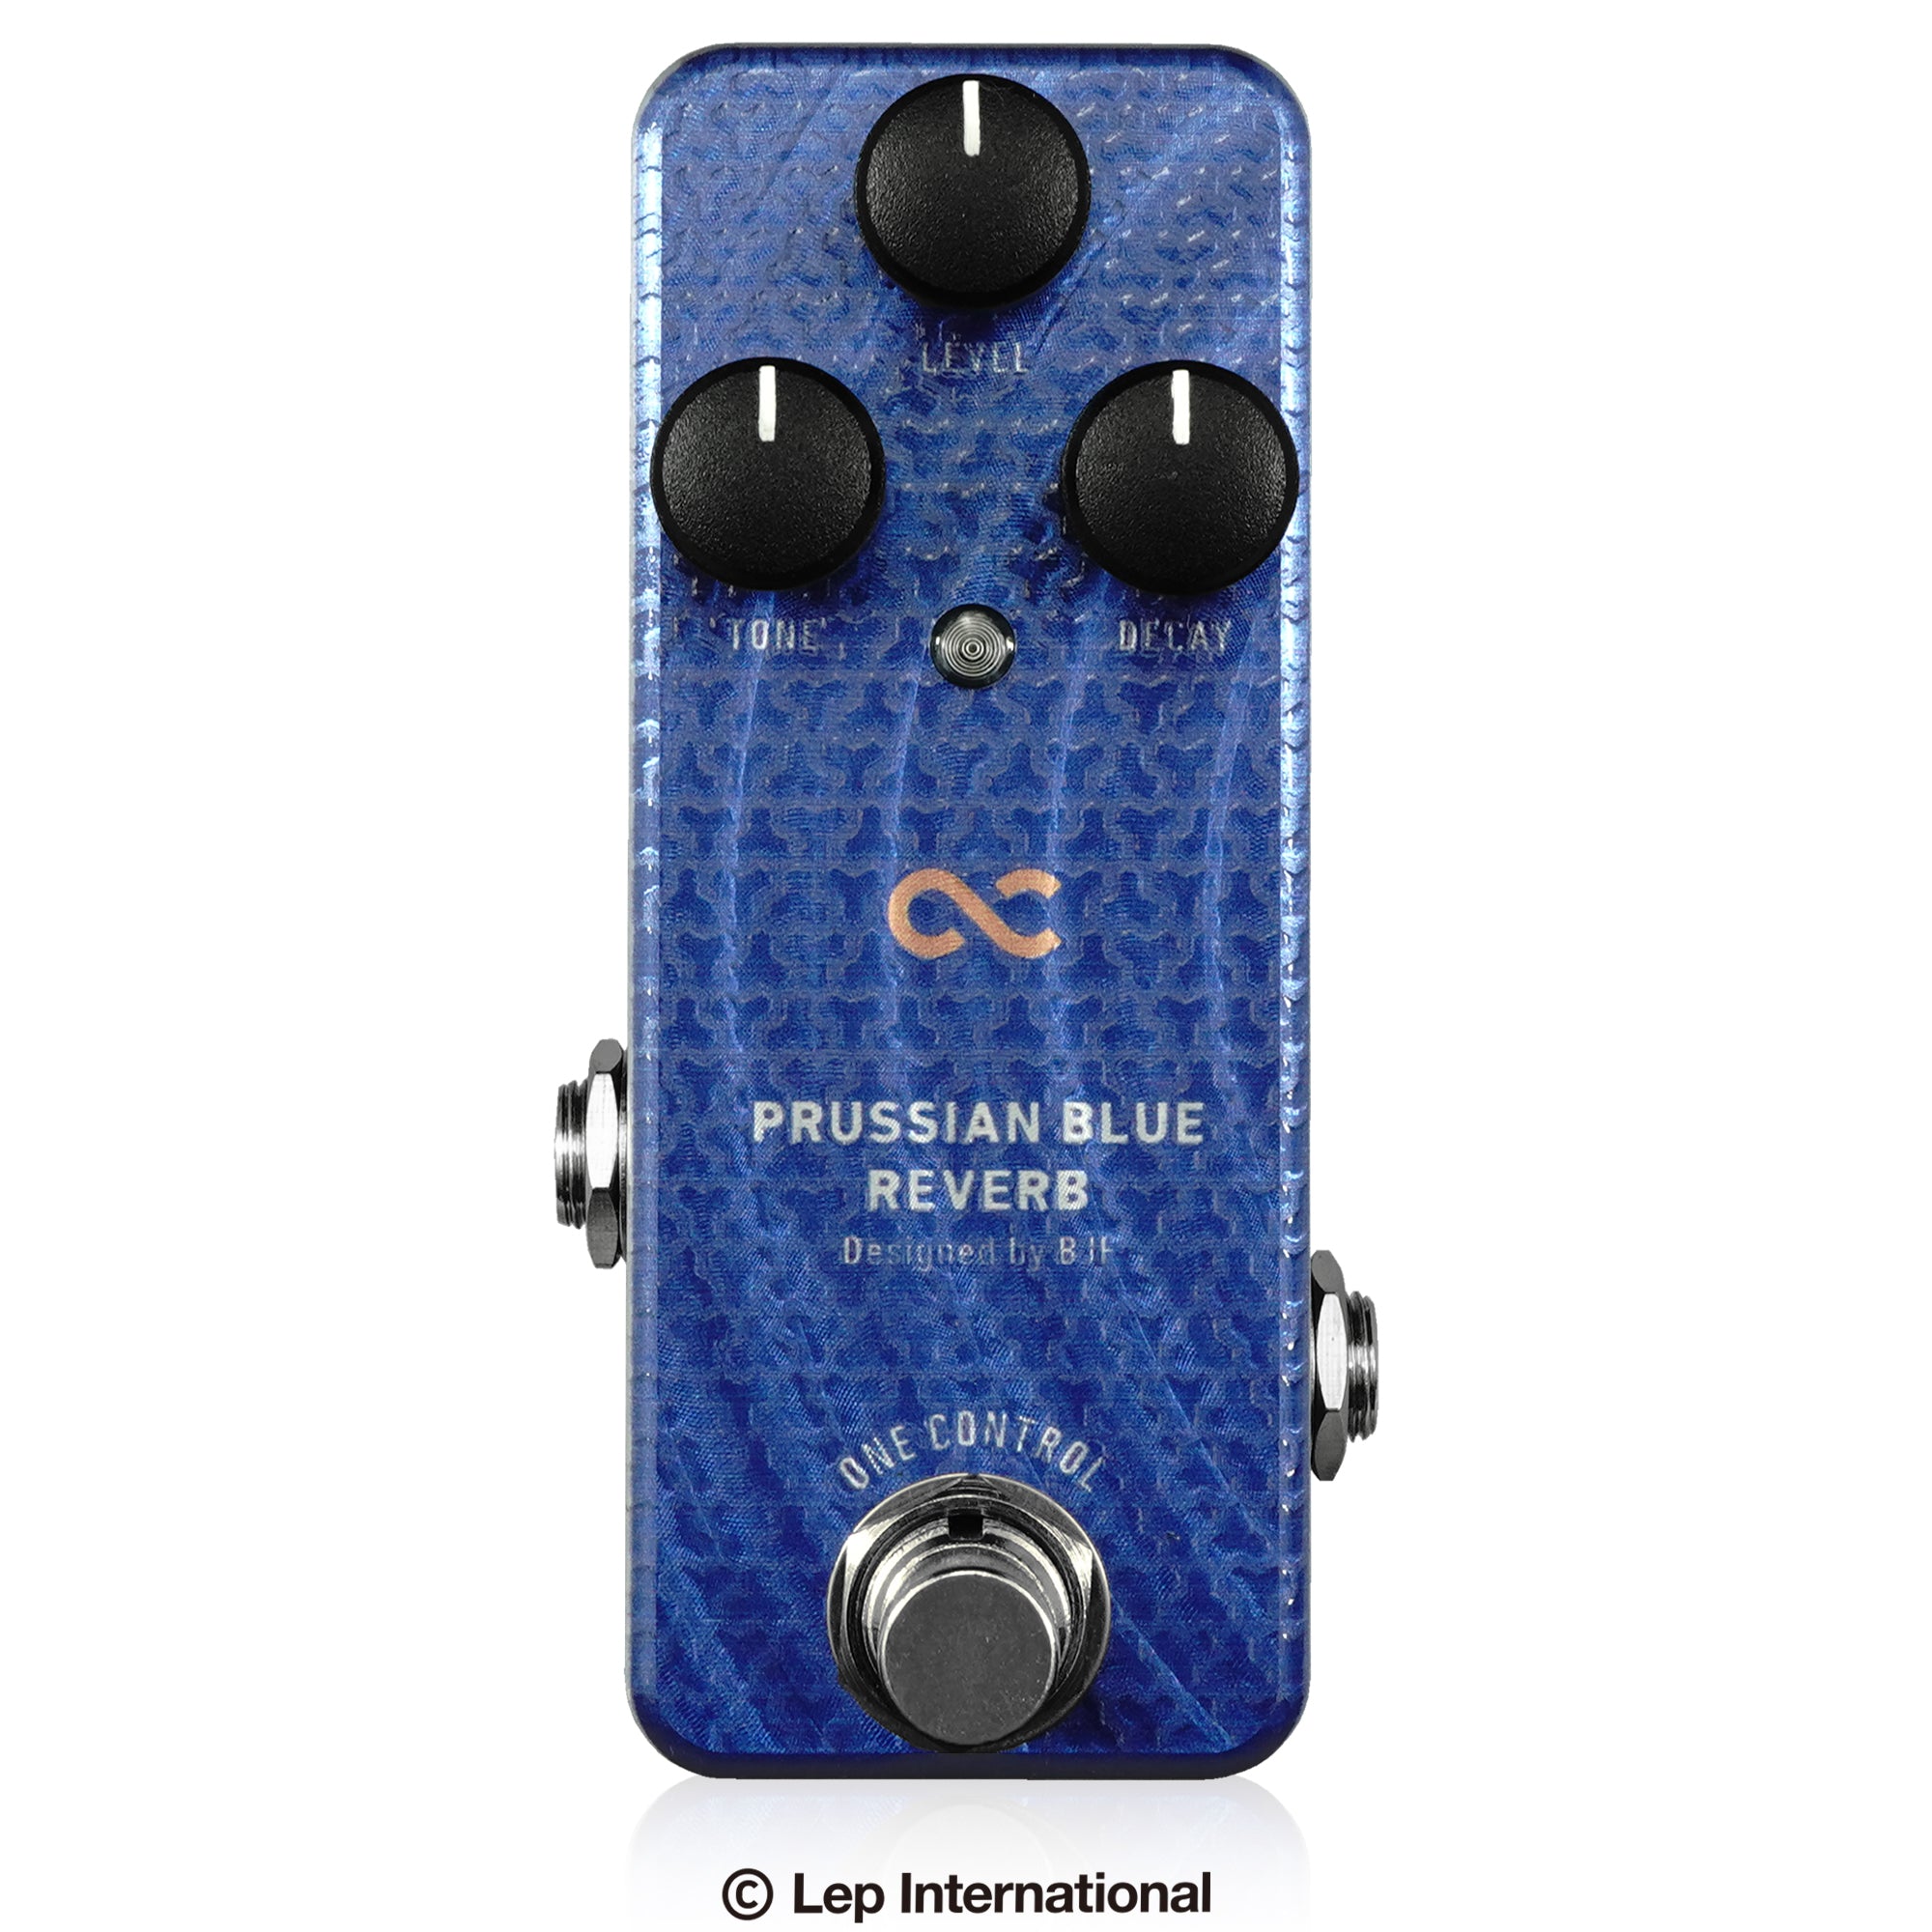 One Control PRUSSIAN BLUE REVERB